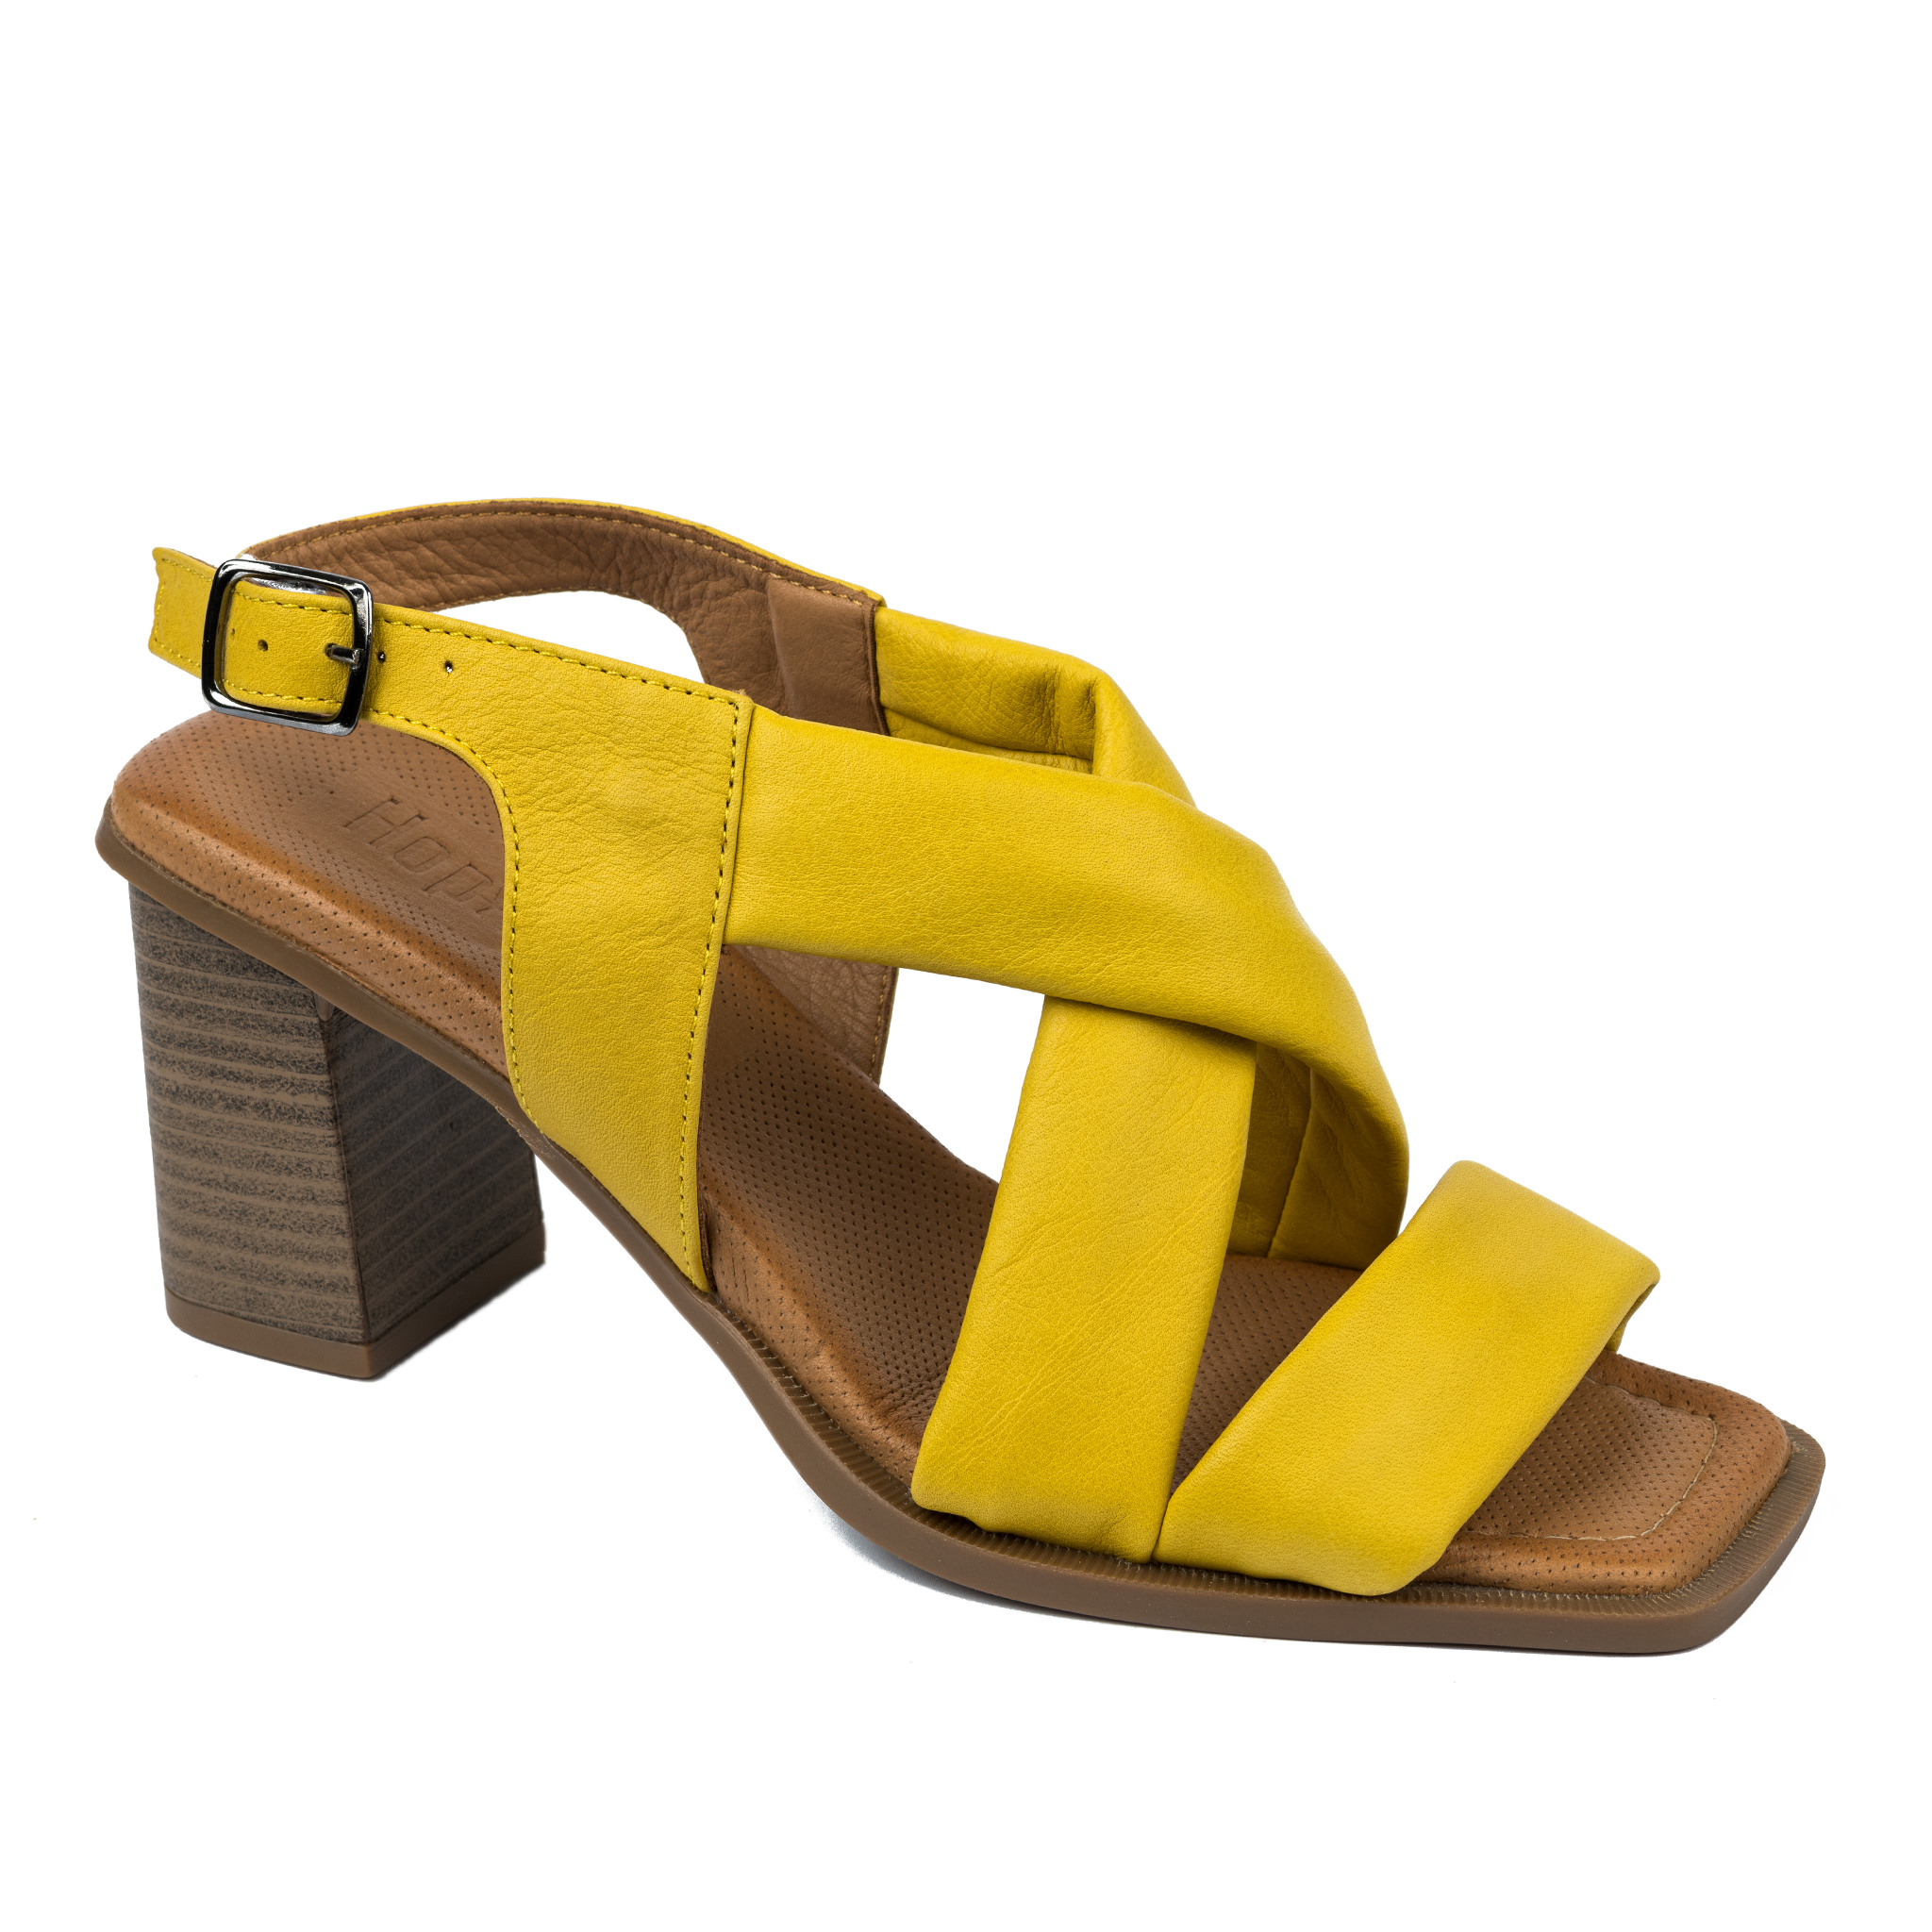 Leather sandals A671 - YELLOW